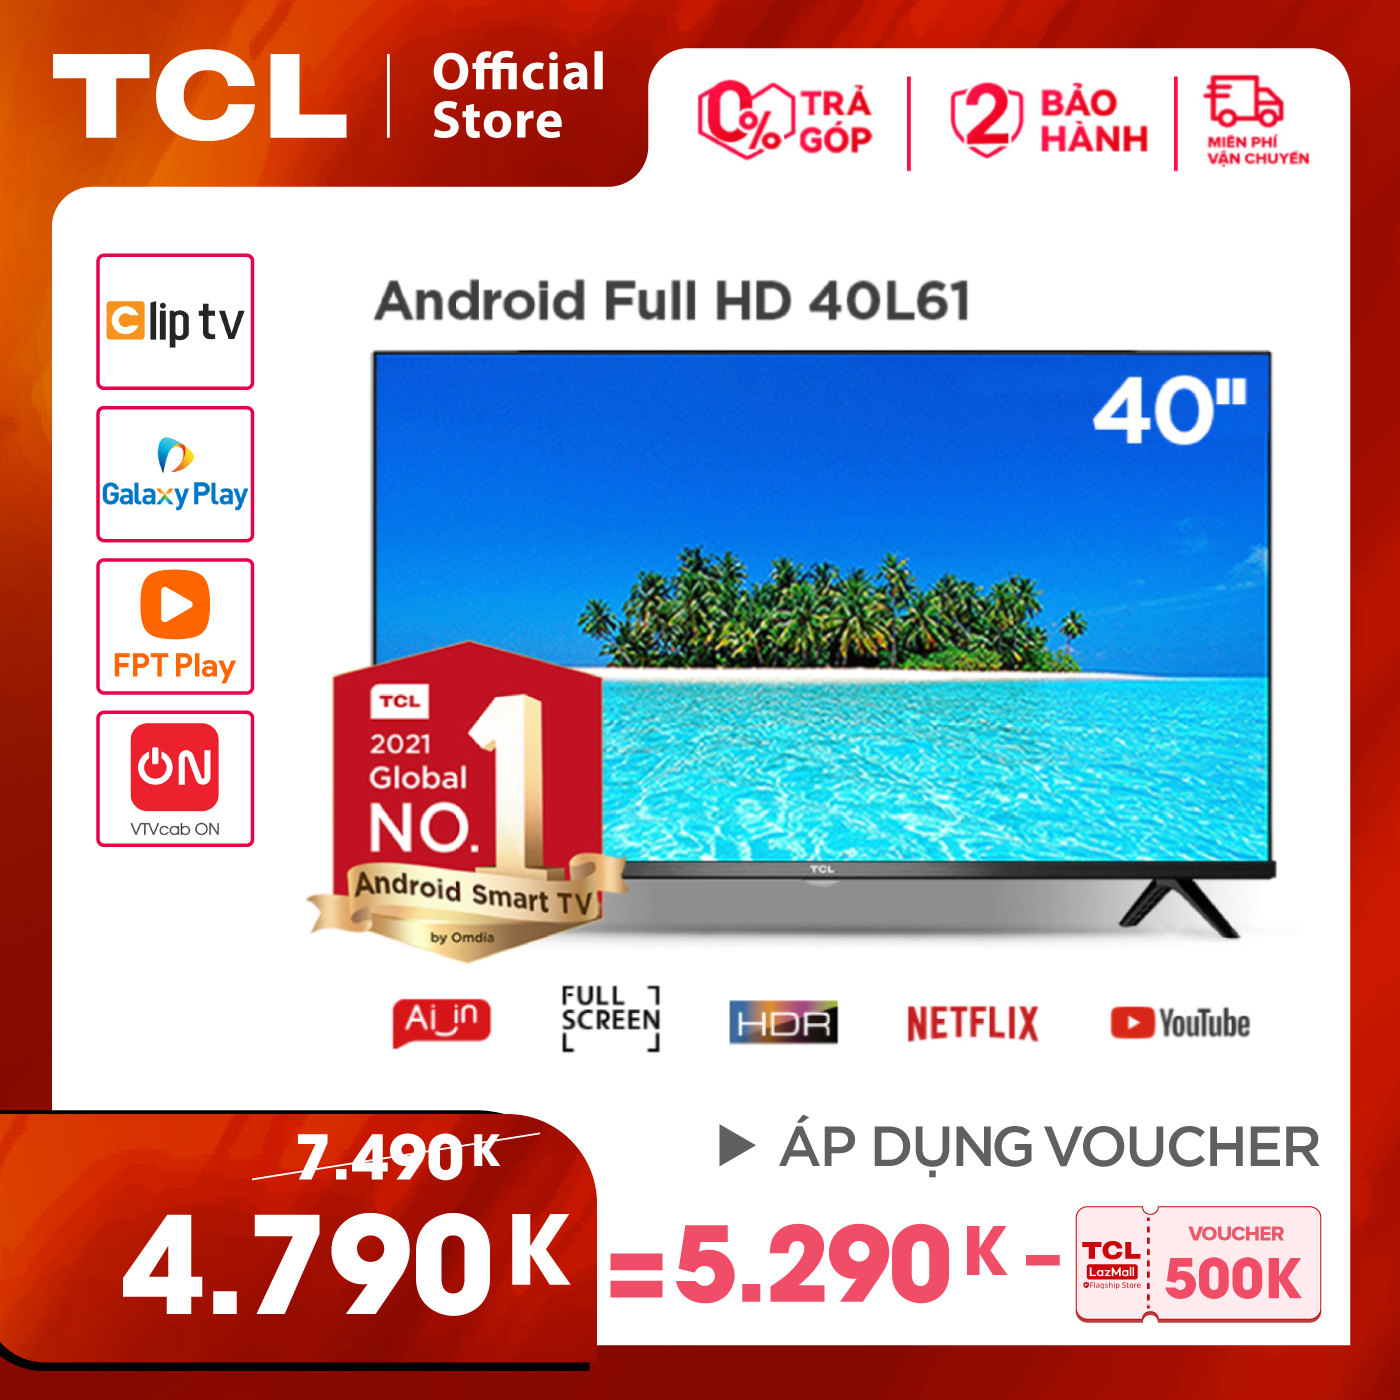 [VOUCHER 500K] Smart TV TCL Android 8.0 40 inch Full HD Wifi - 40L61 - HDR Dolby Chromecast T-cast AI+IN...